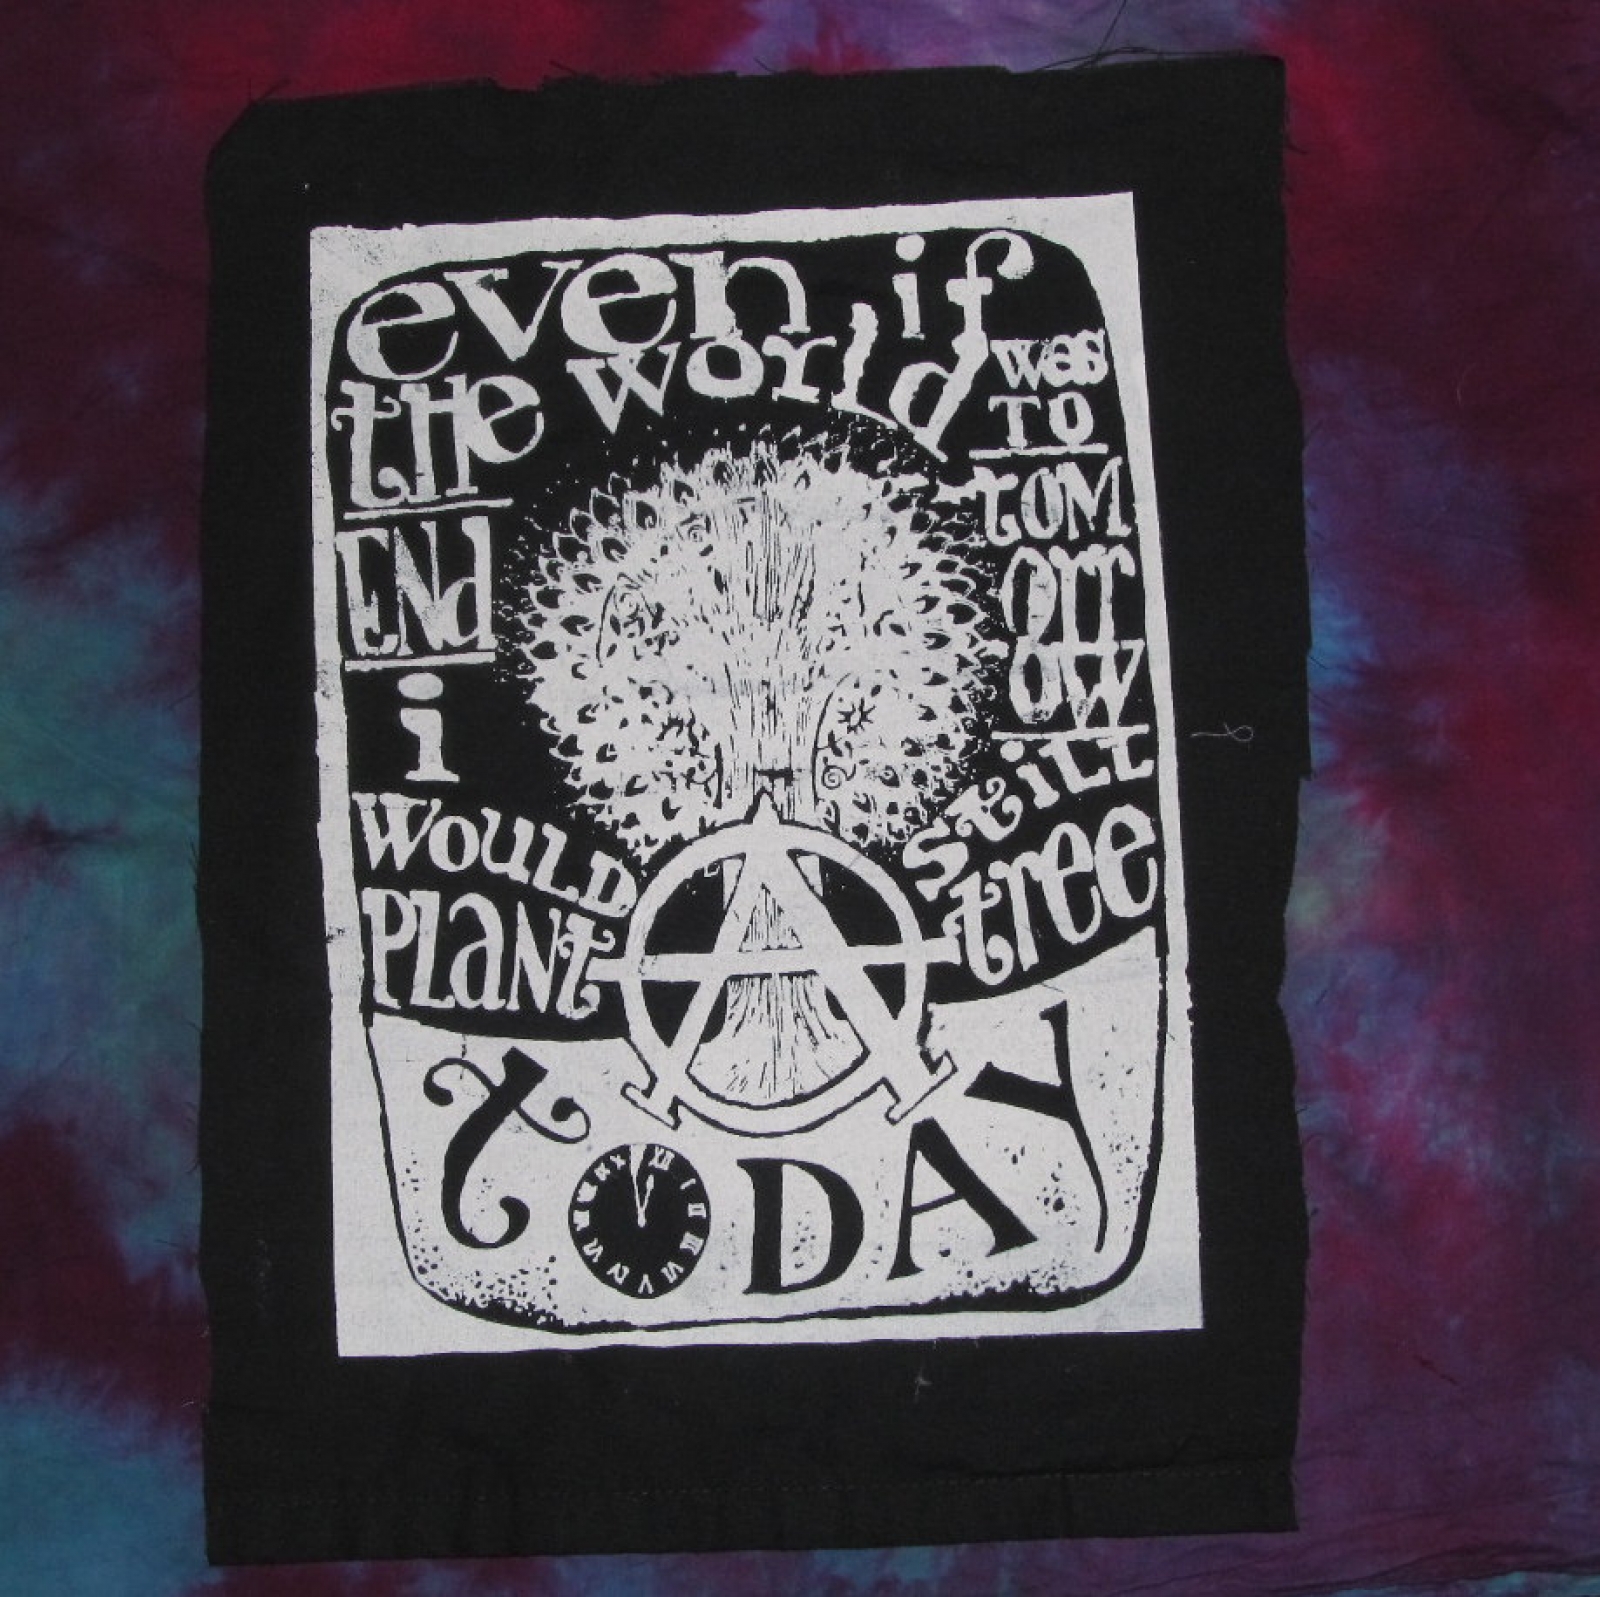 Punk Patch, Even if the World Ended Tommorrow, I Would Still Plant a Tree  Today - Large Bag or Back Patch in BLACK - anarchy tree anarchist